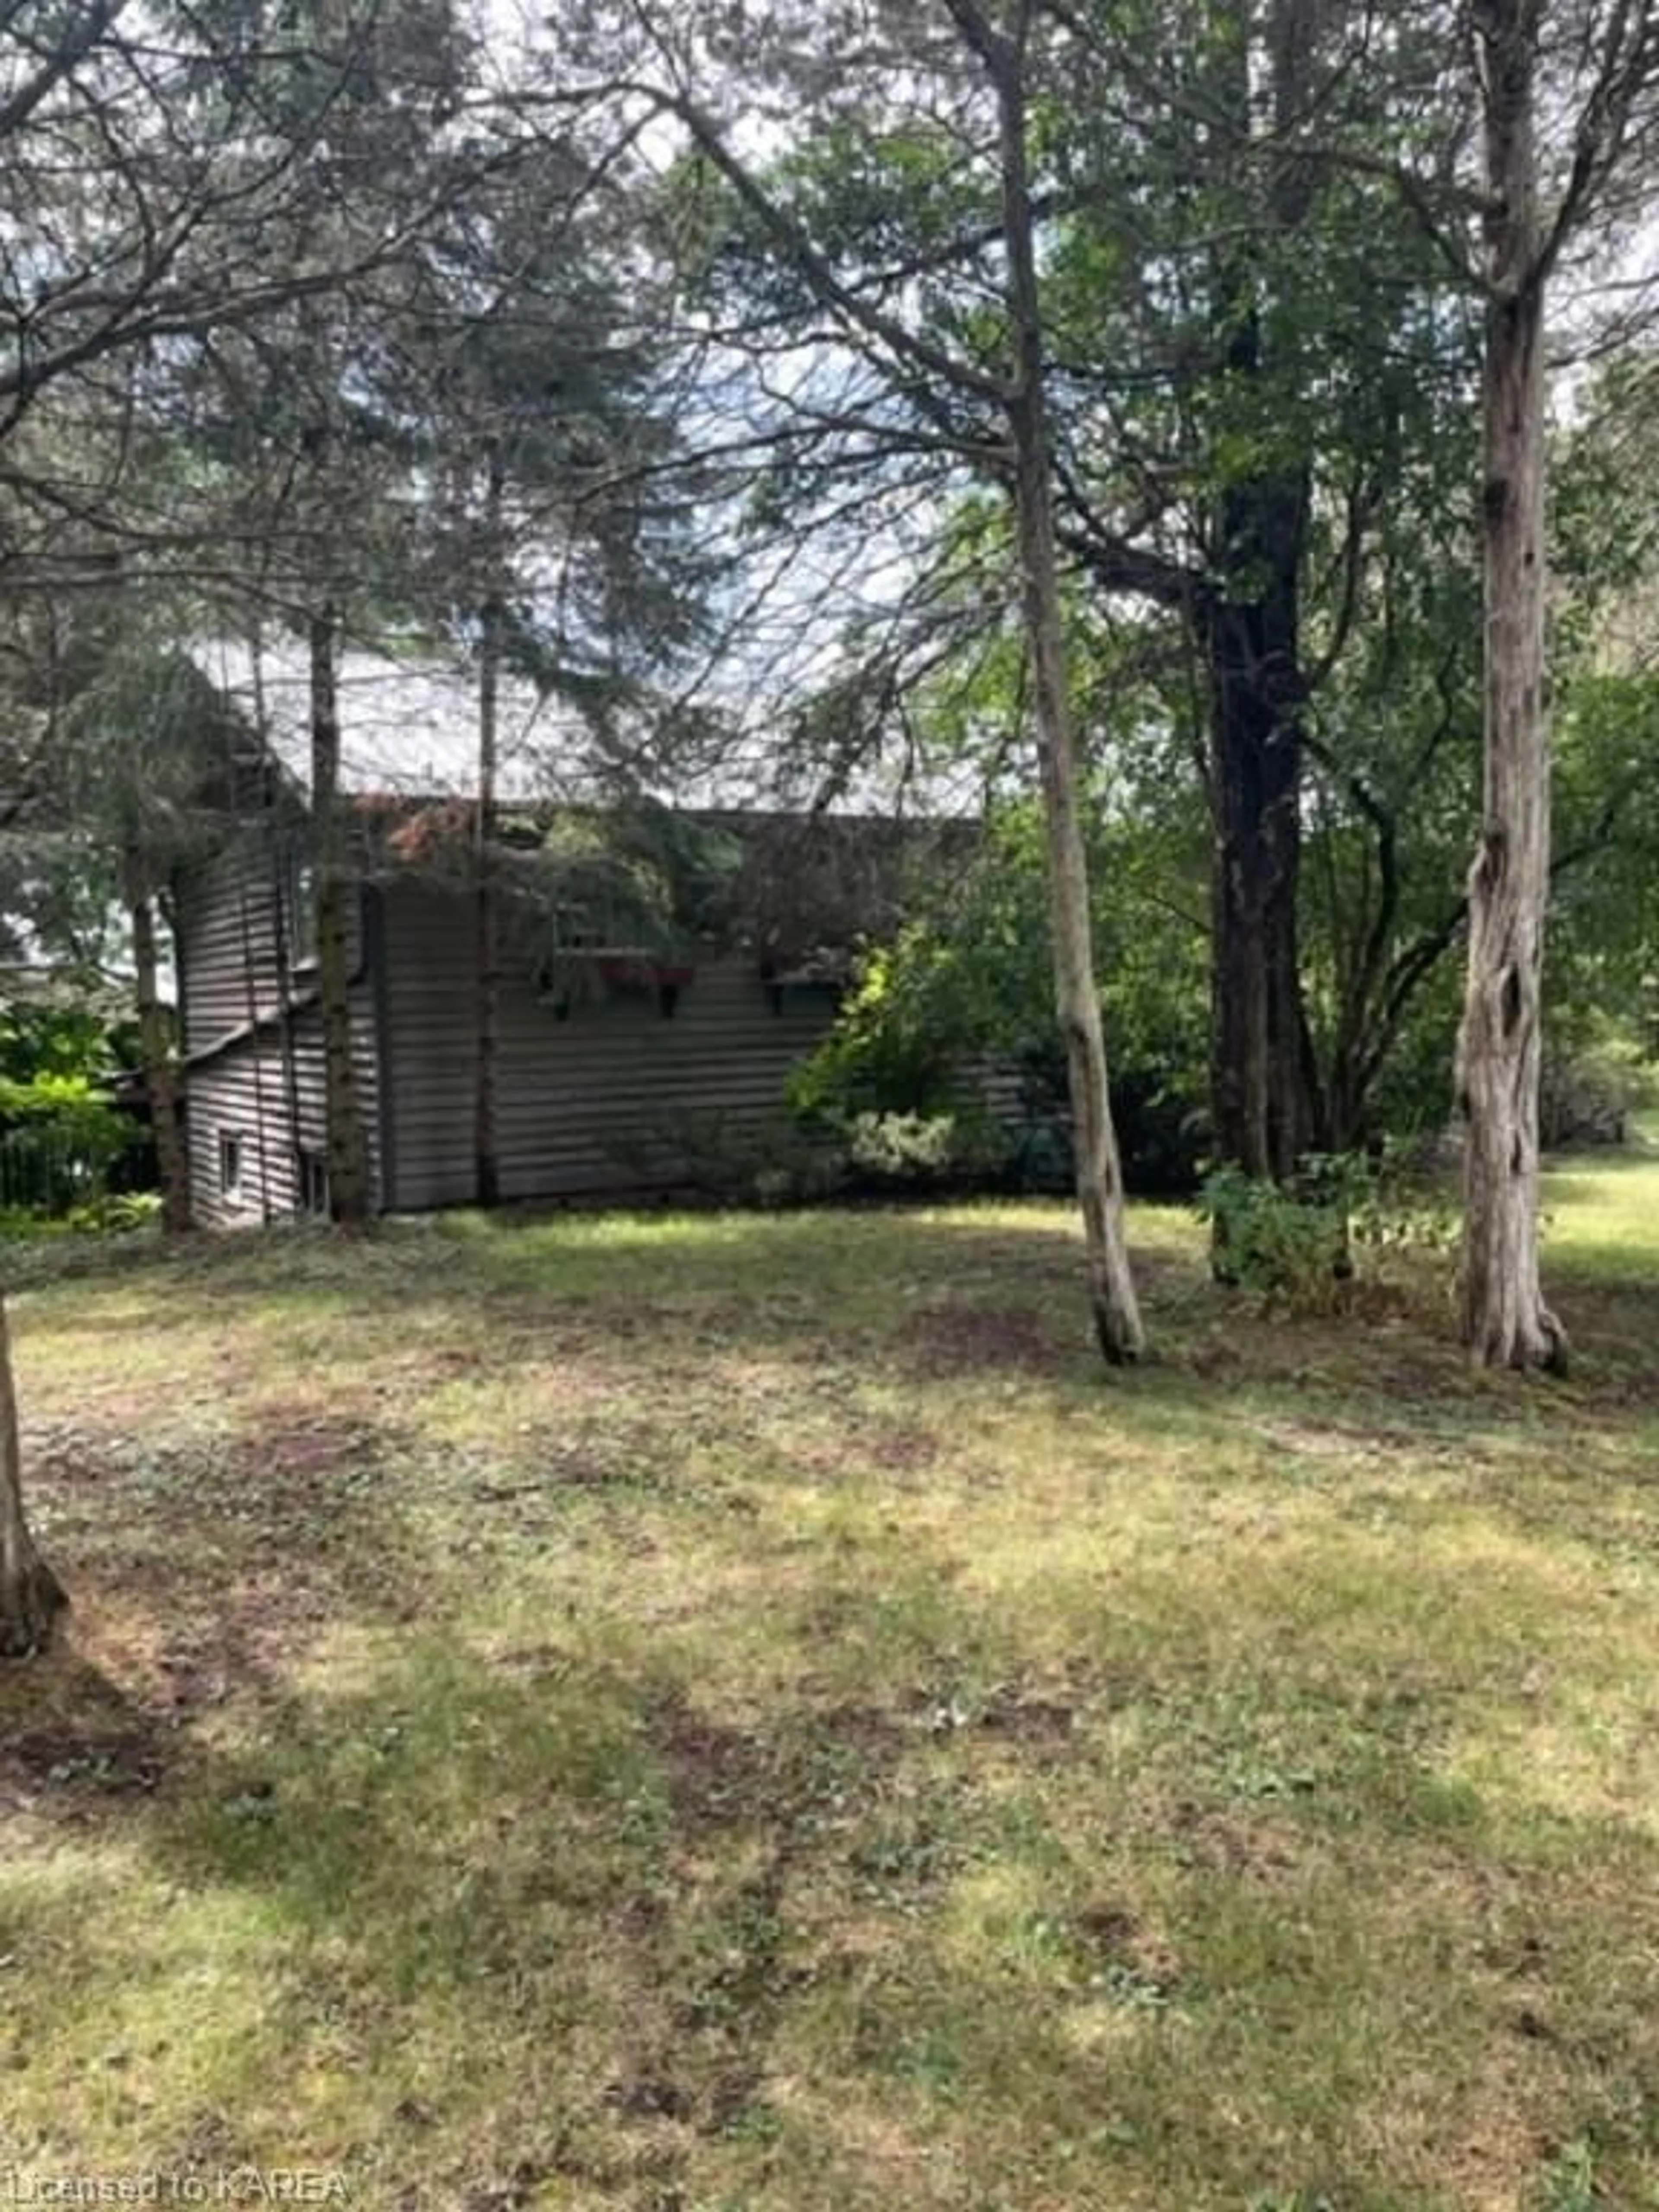 Shed for 4721 County Road 9, Napanee Ontario K7R 3K8